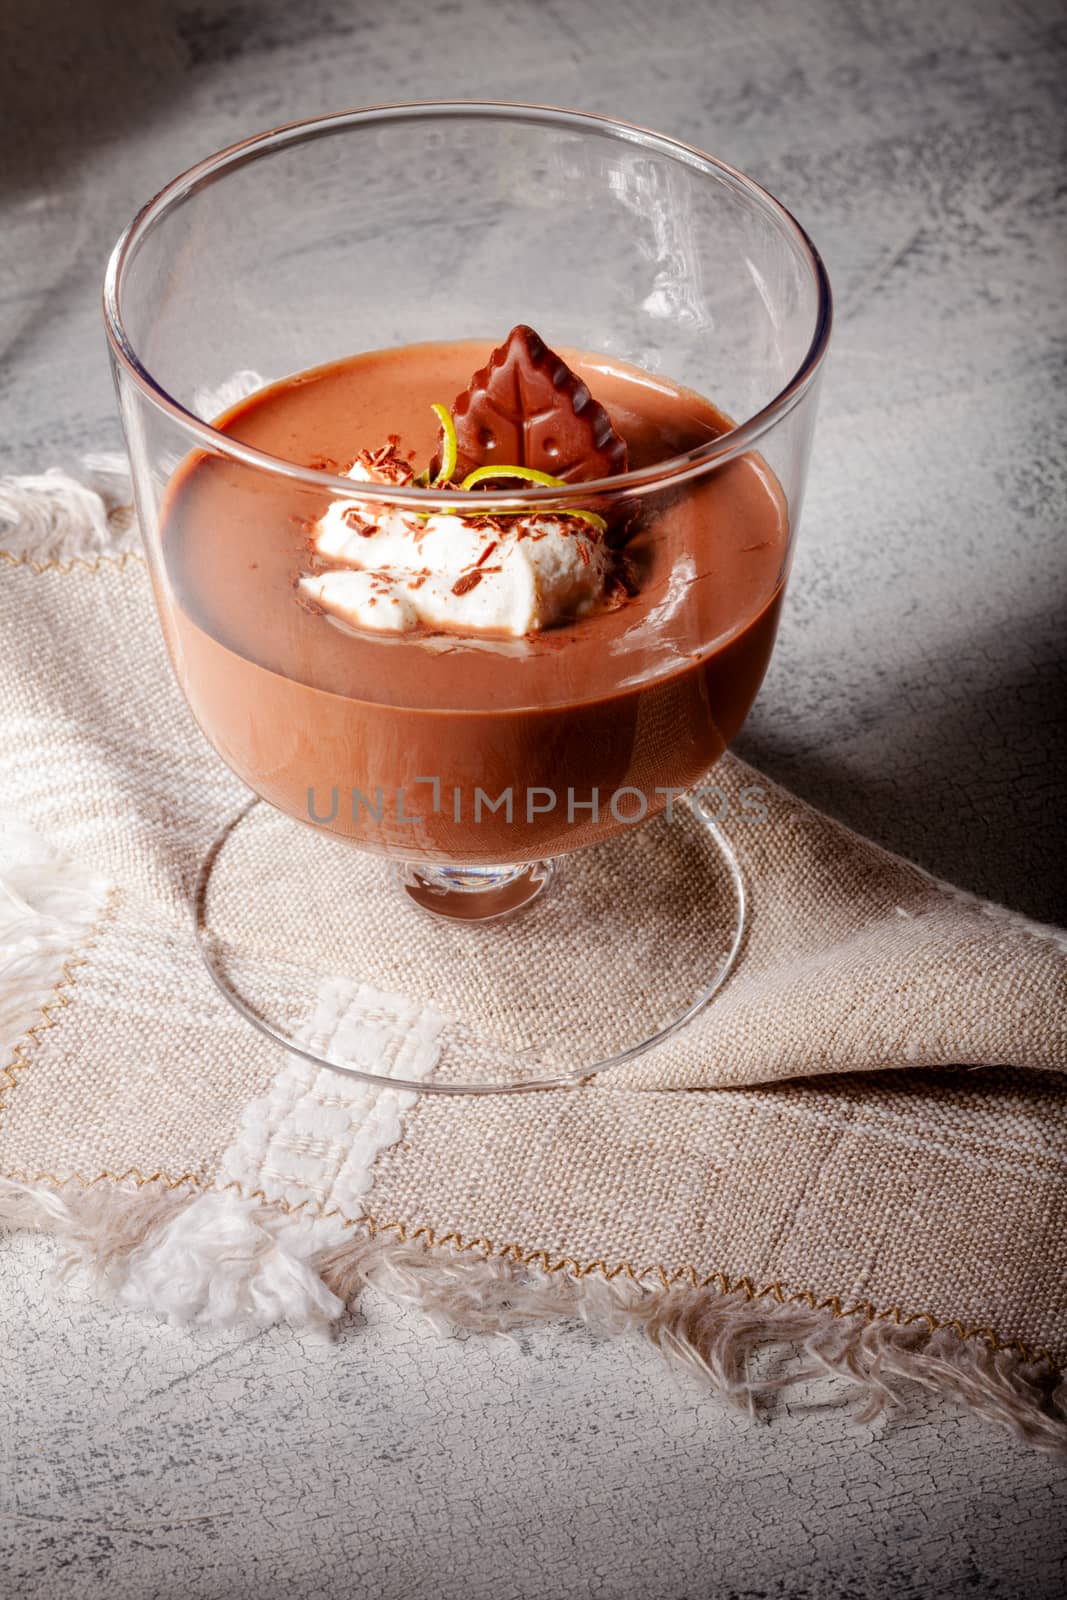 Glass with Chocolate Mousse Dessert served on a wooden surface